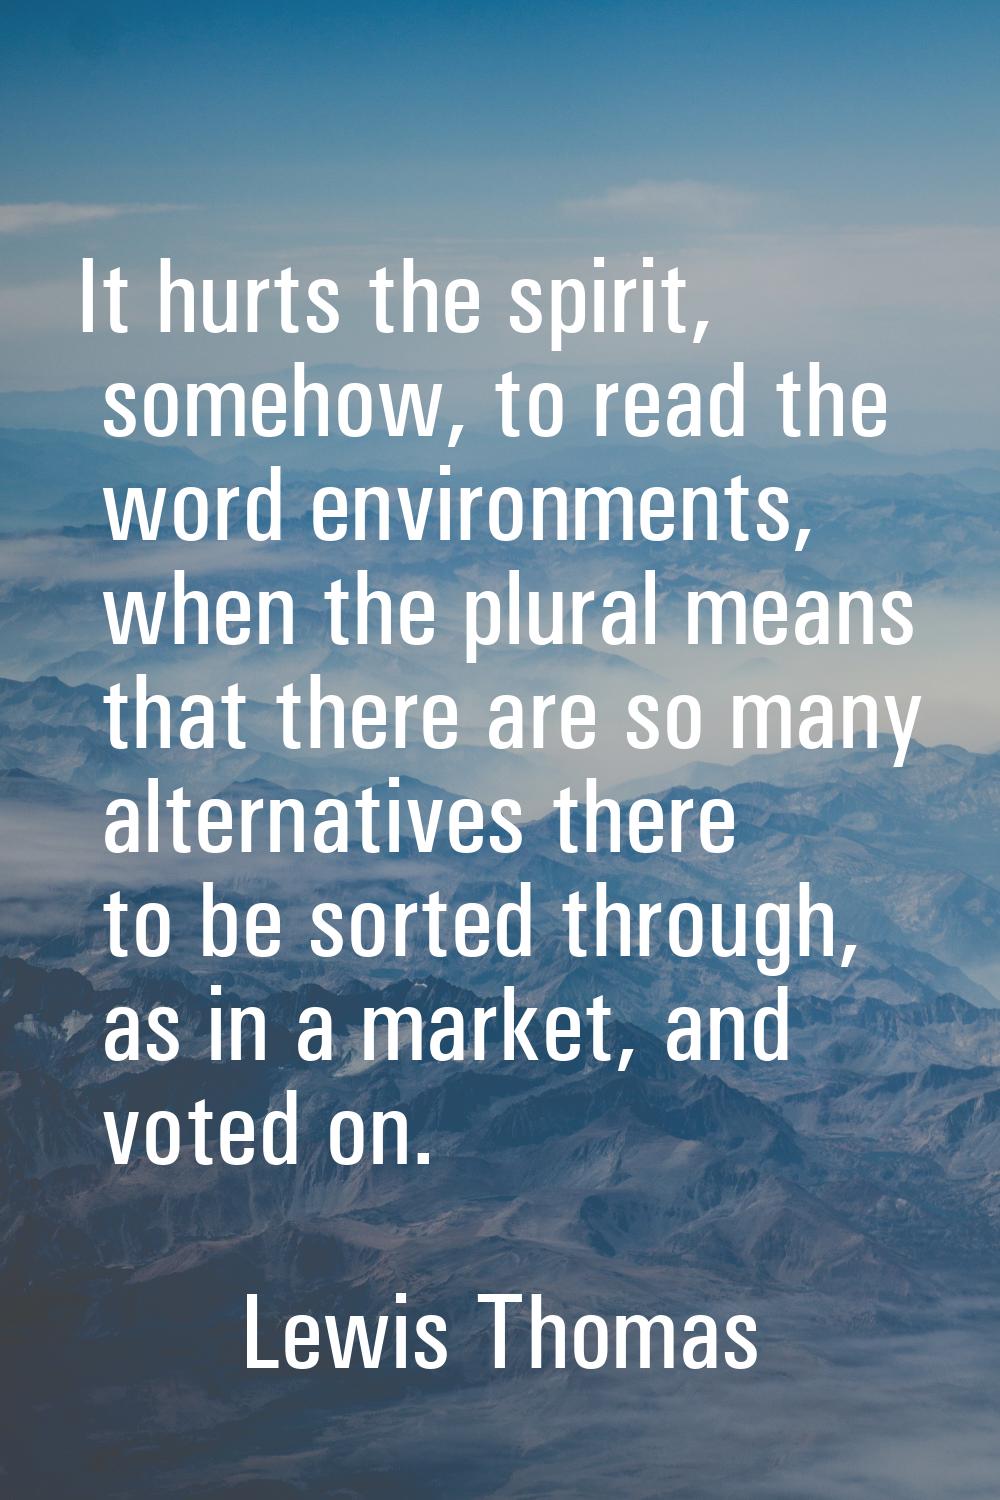 It hurts the spirit, somehow, to read the word environments, when the plural means that there are s